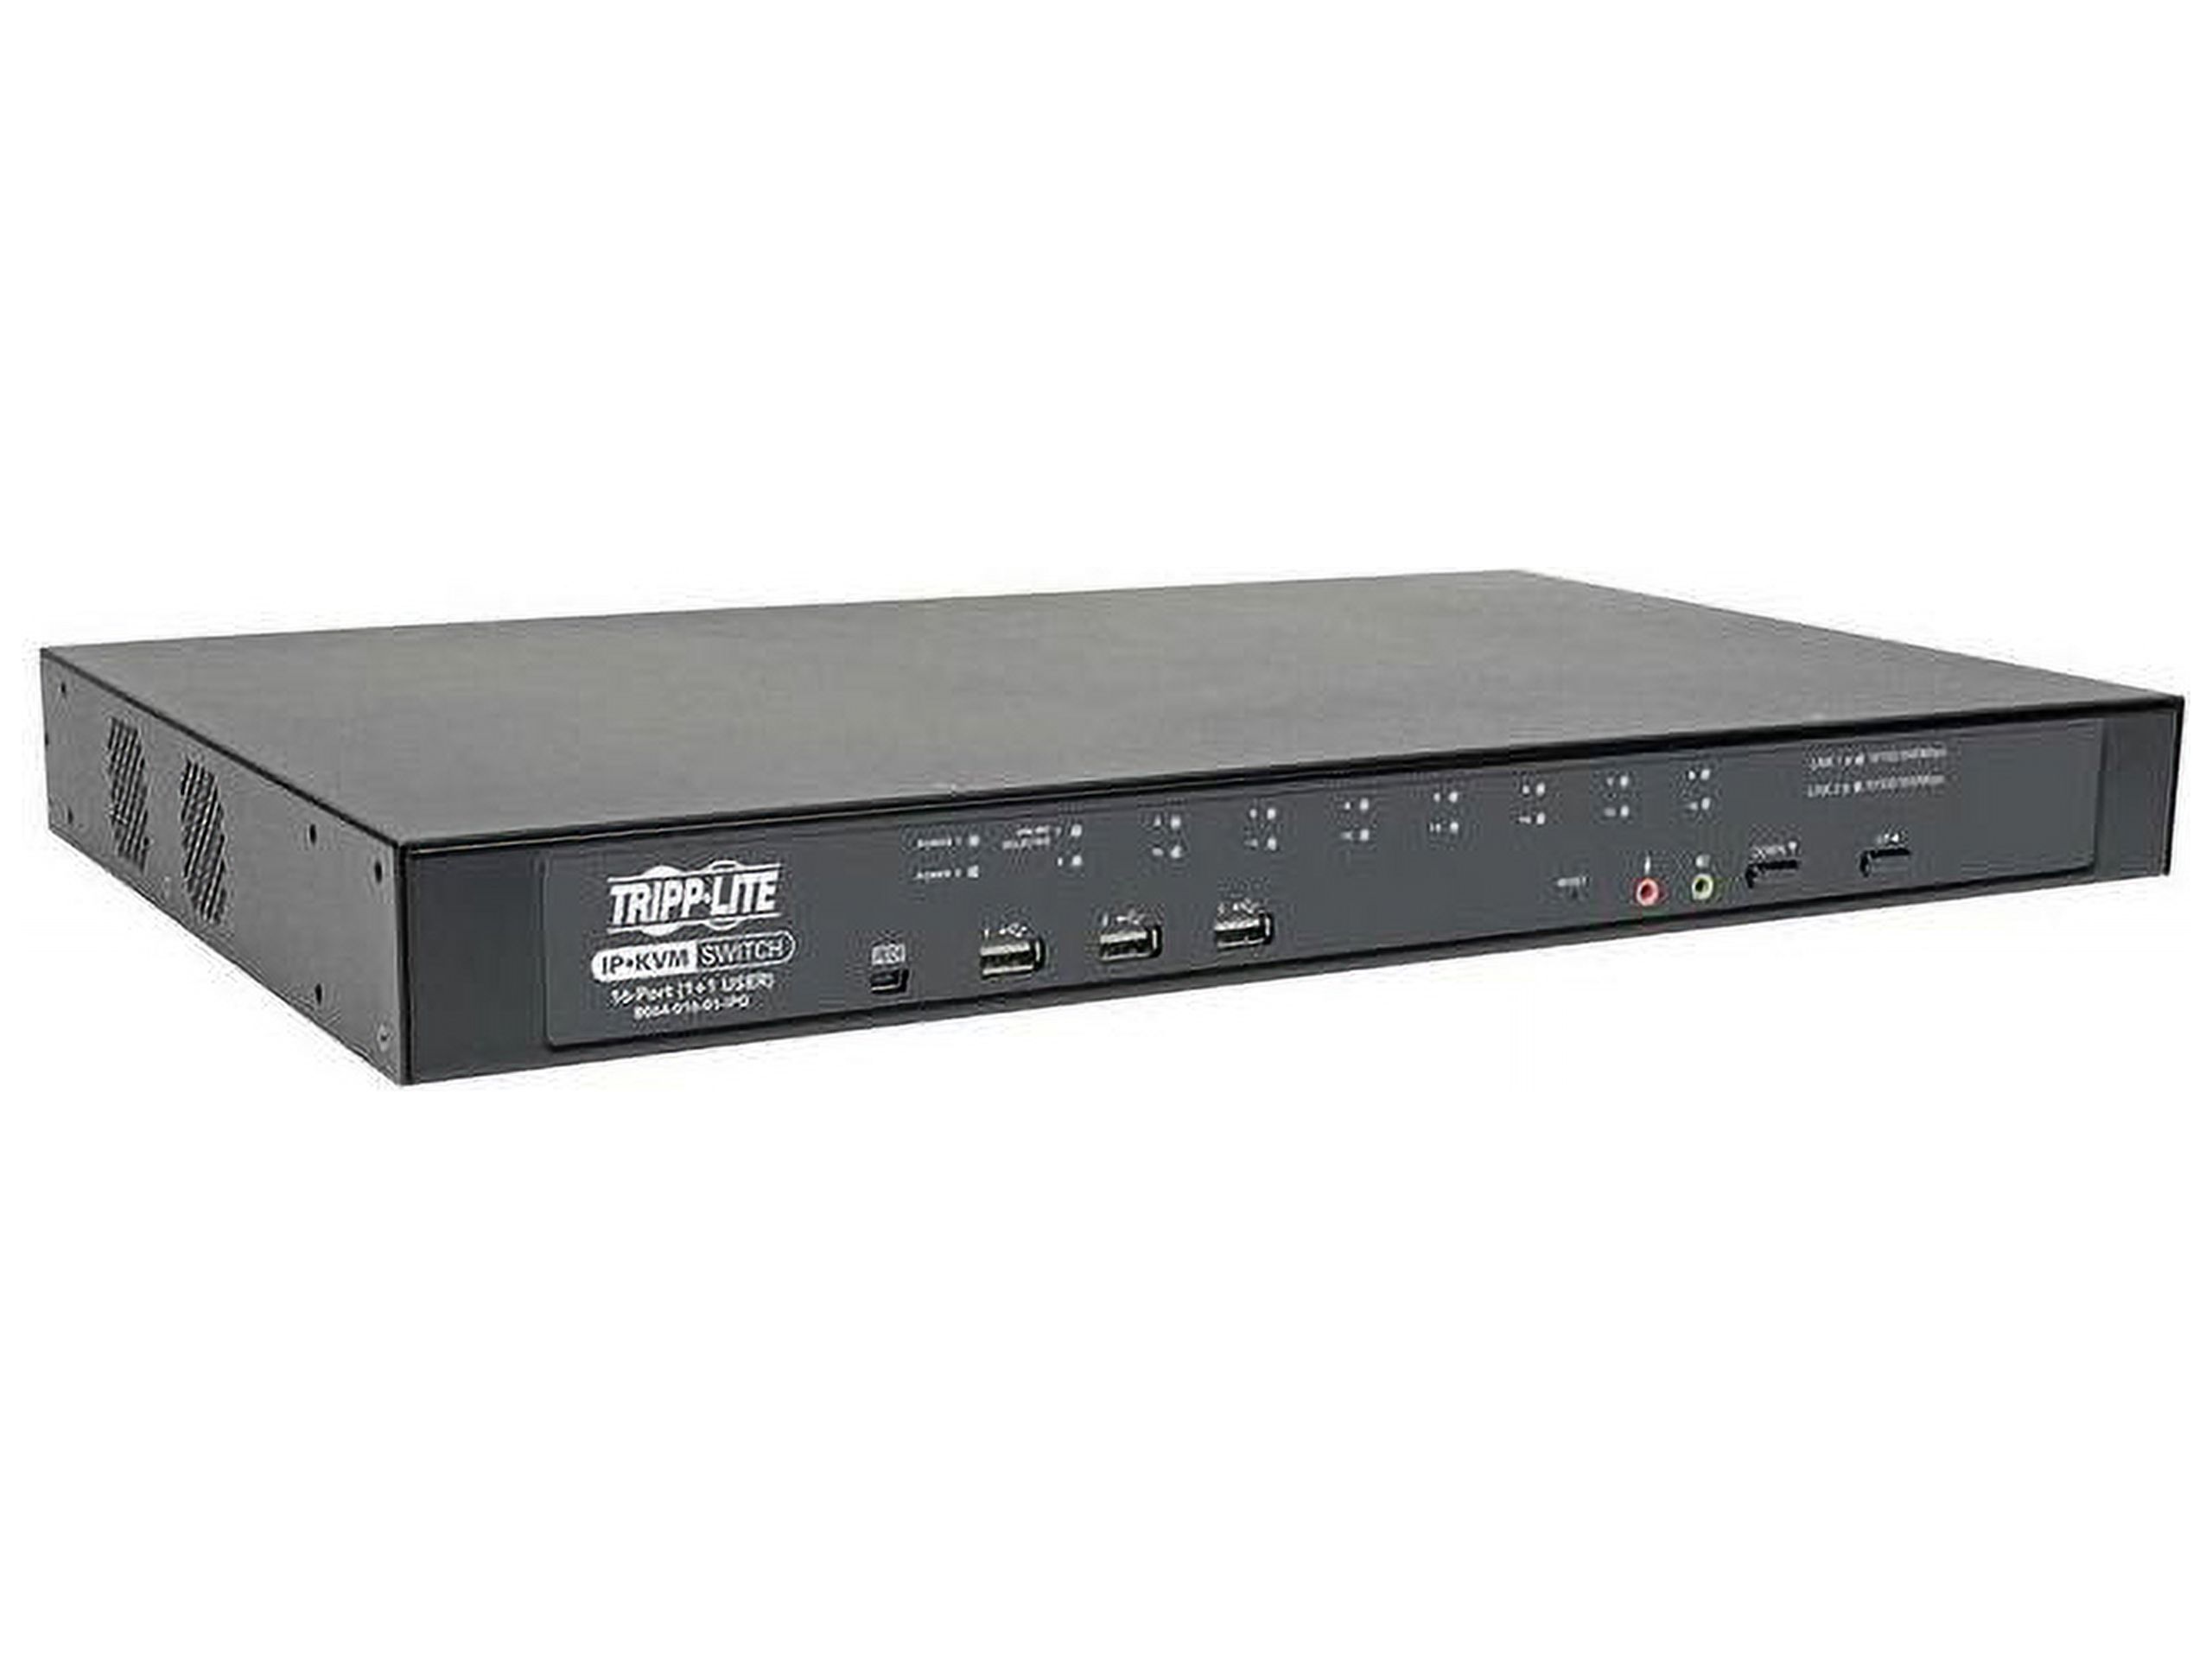 Tripp Lite 16-Port Cat5 KVM over IP Switch with Virtual Media - 1 Local & 1 Remote User, 1U Rack-Mount, TAA - KVM switch - 16 x KVM port(s) - 1 local user - 2 IP users - rack-mountable - government GSA - TAA Compliant - image 5 of 5